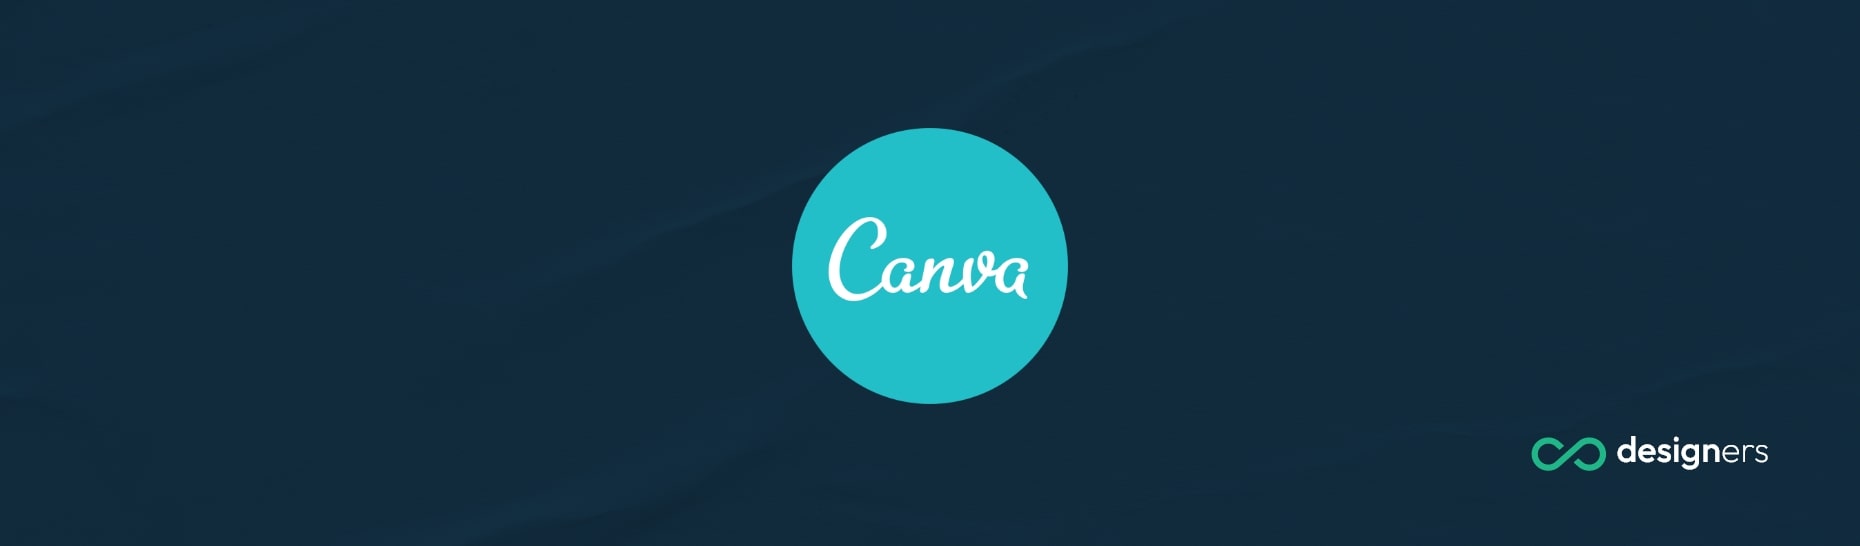 Where Can I Find Patterns in Canva?